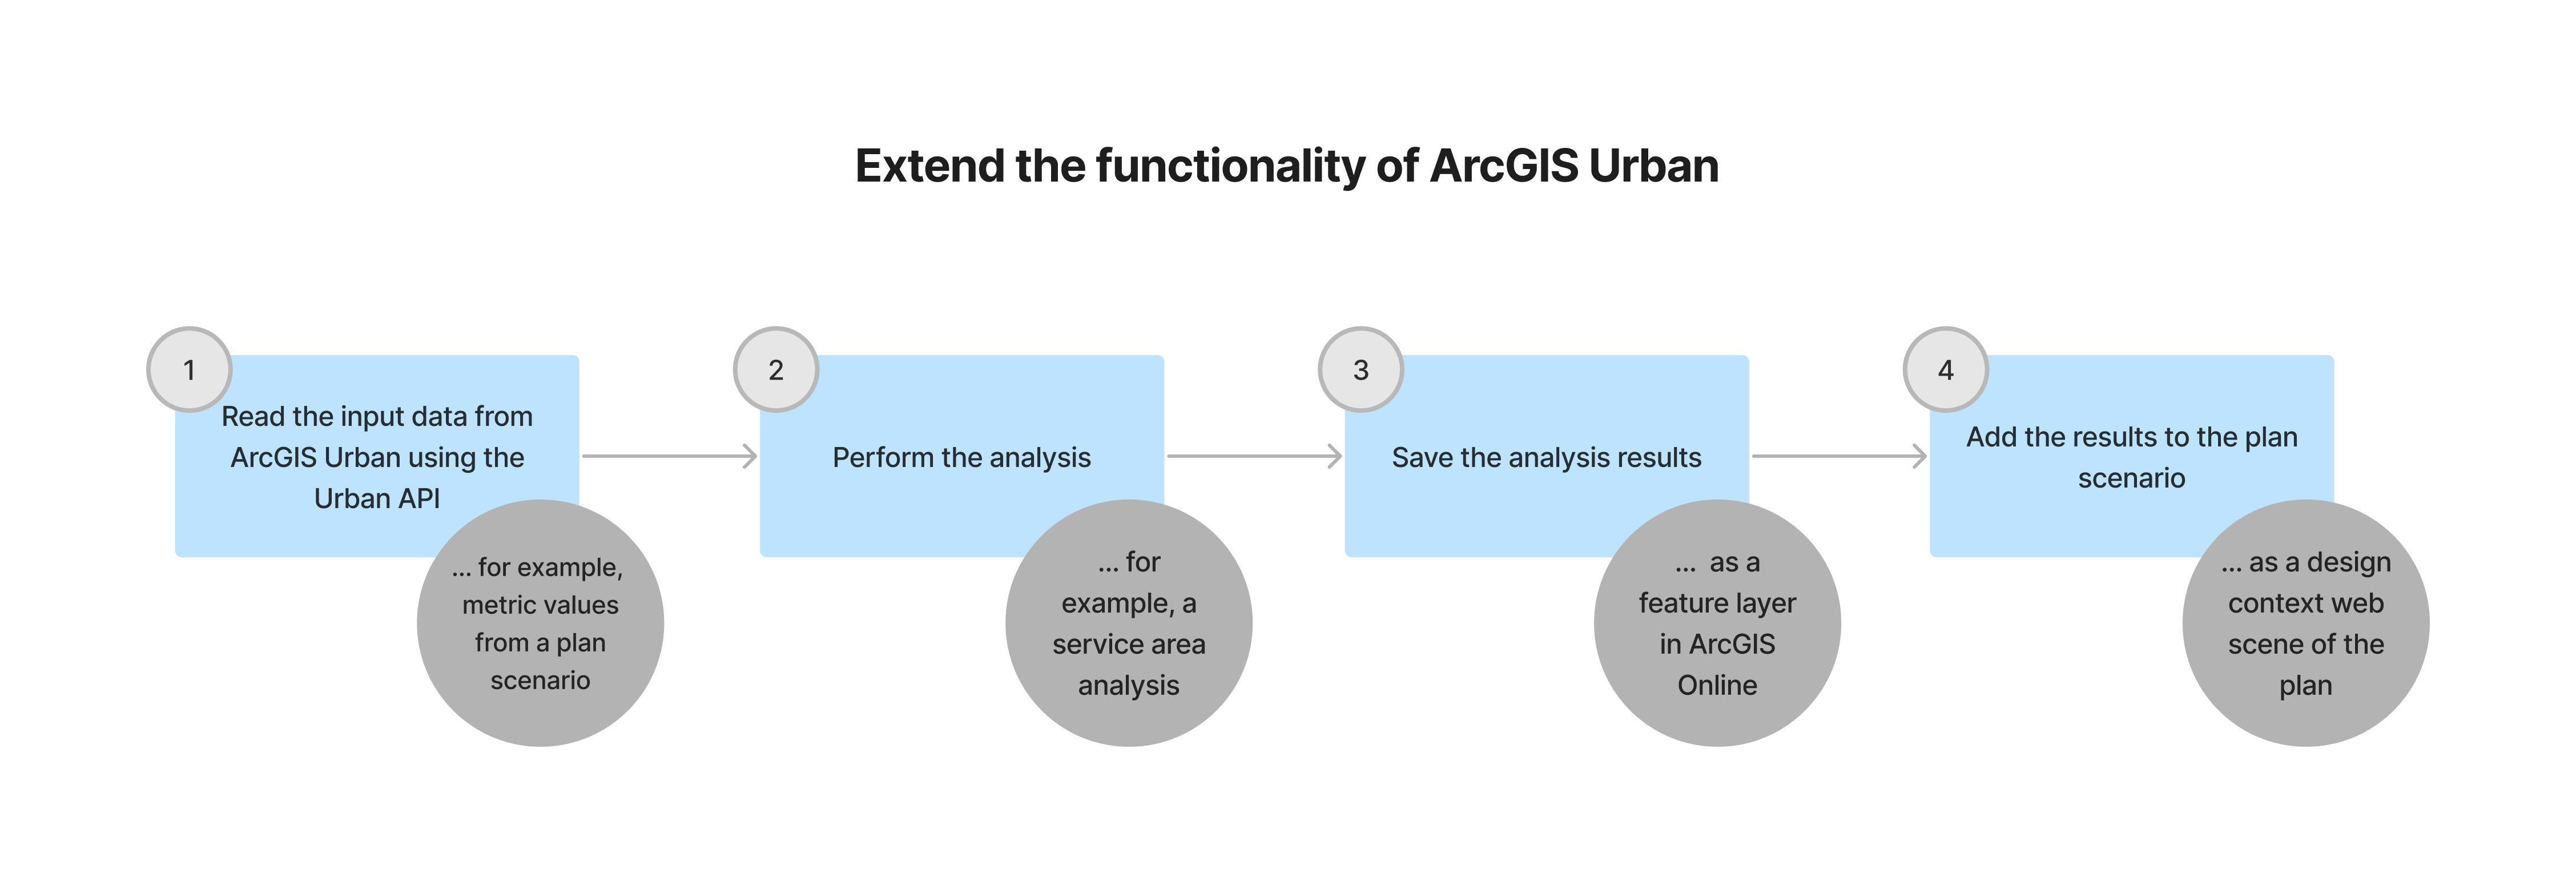 Extend the functionality of ArcGIS Urban